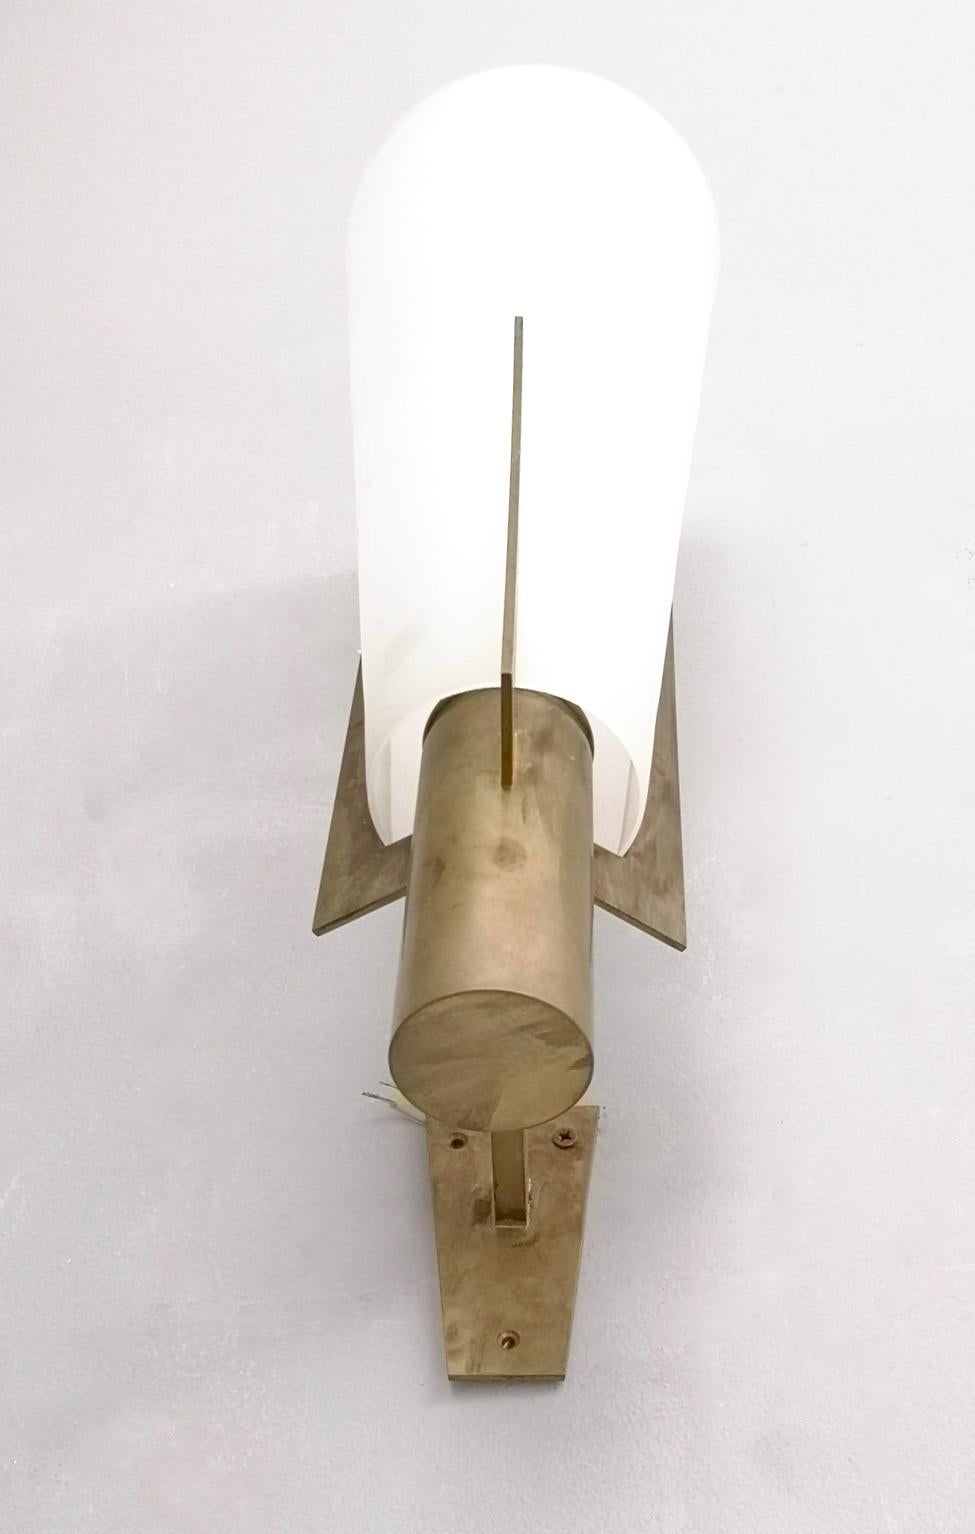 Italian Vintage Brass and Satin Glass Conical Wall Sconce by Stilnovo Model 2021, Italy